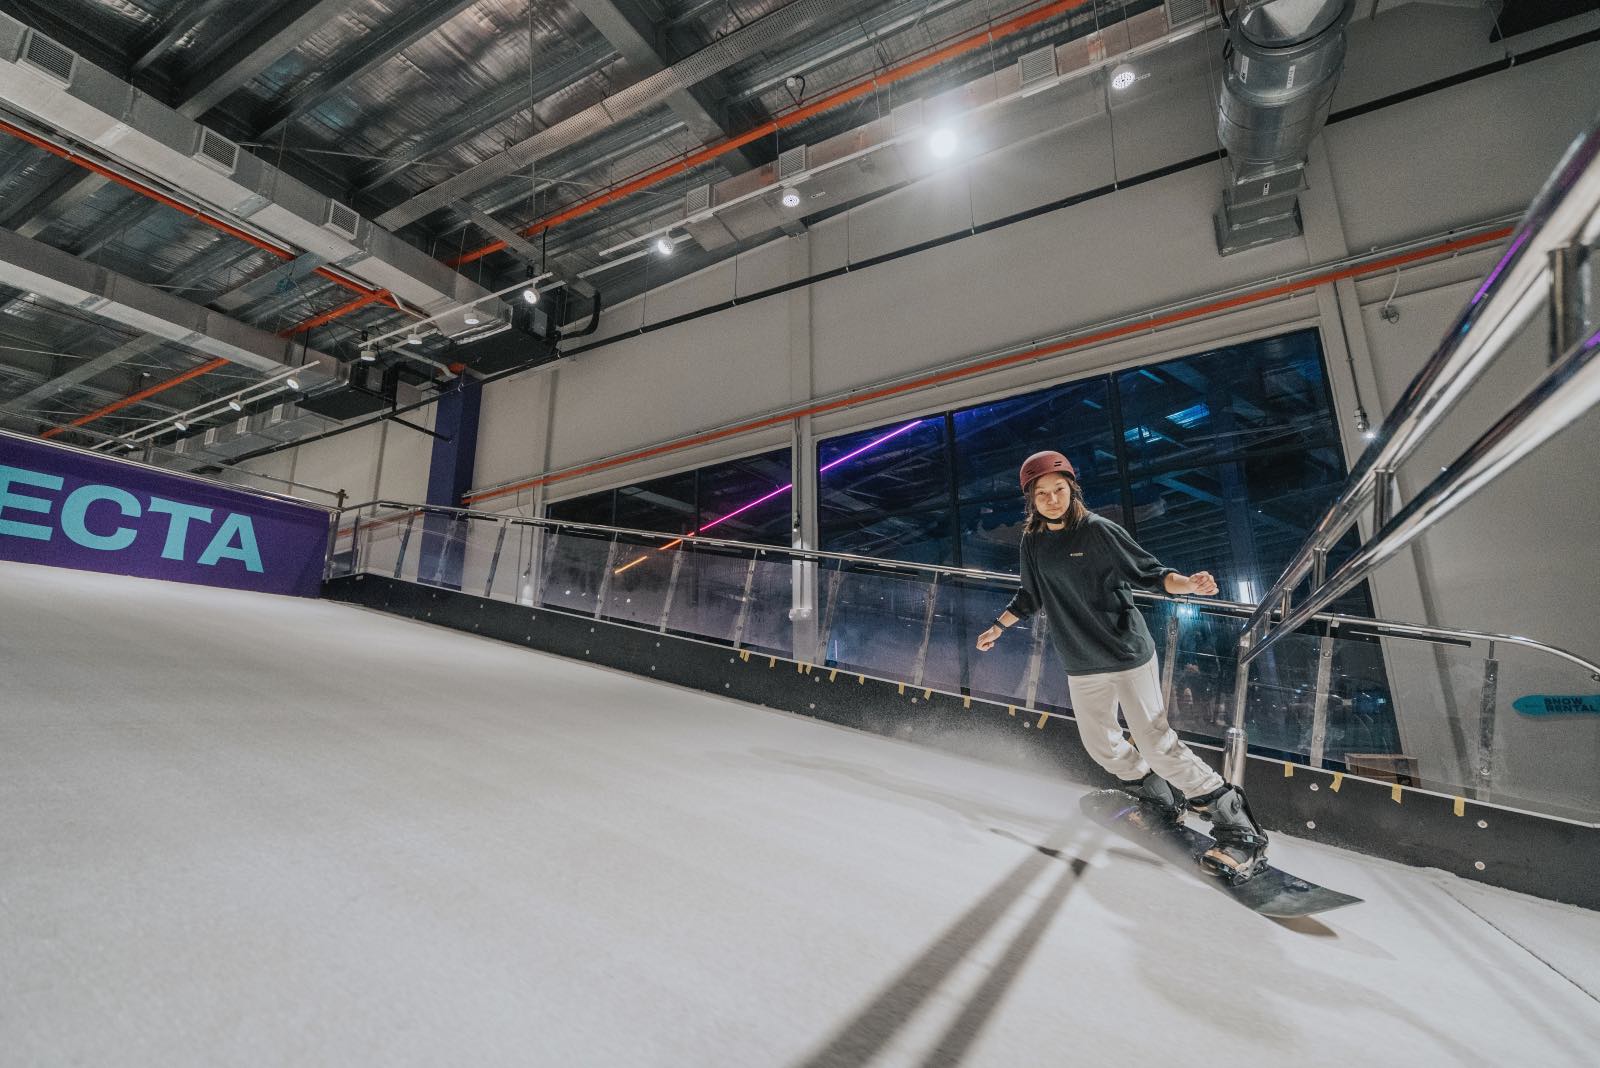 , Trifecta makes snowboarding, skiing and surfing a reality in Singapore from October 2023